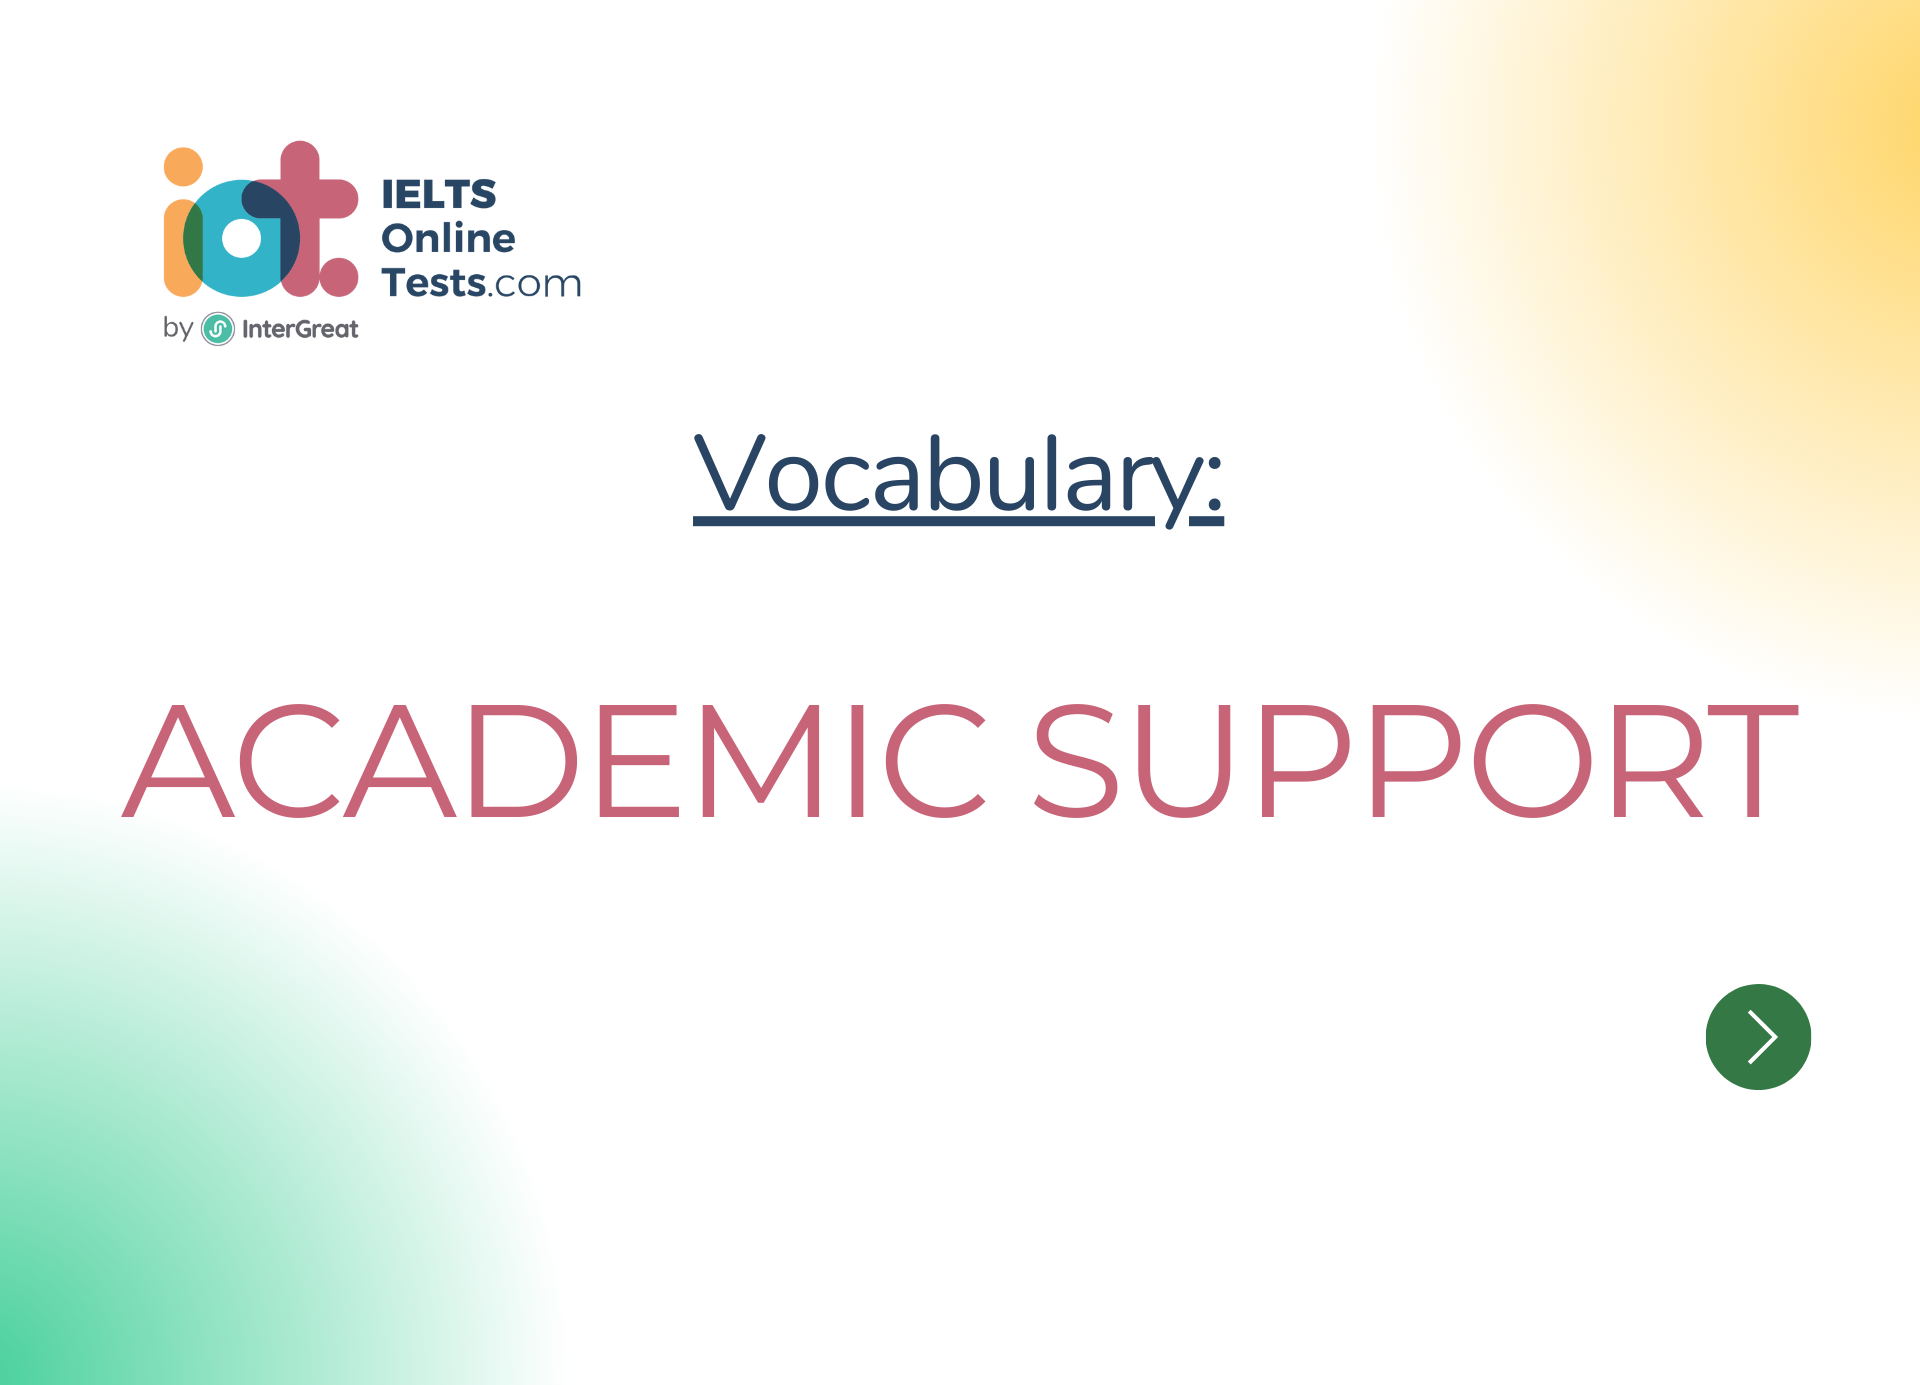 Academic support